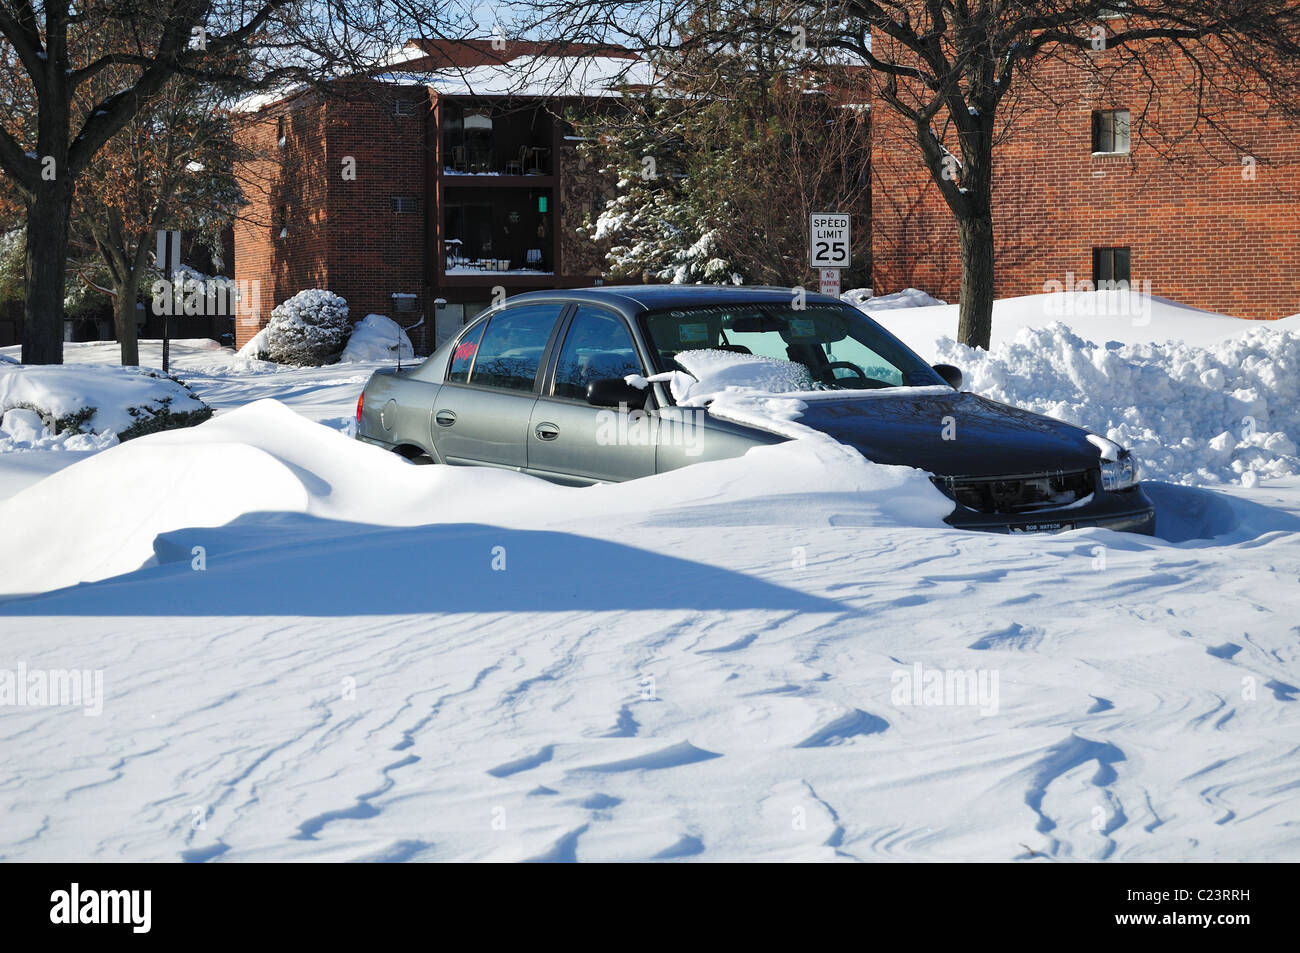 blizzard conditions swept some vehicles clean while sculpting large snowdrifts around them with 20 inches of snow. Bartlett Illinois, USA. Stock Photo